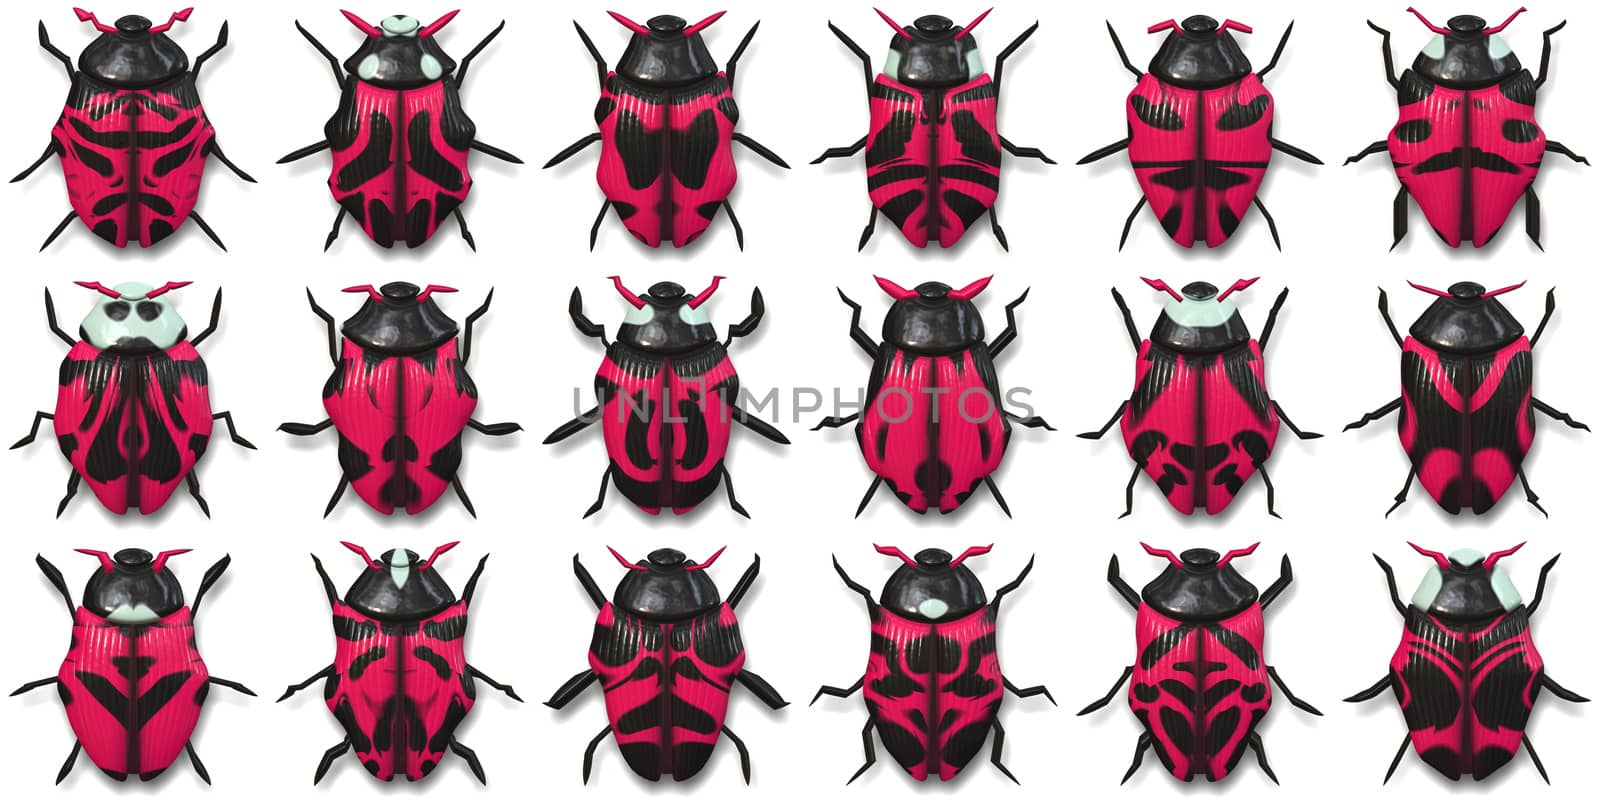 Isolated Beetle Collection Background. Many Bugs Wildlife Surface. Macro Closeup. 3D Illustration. 3D Rendering.